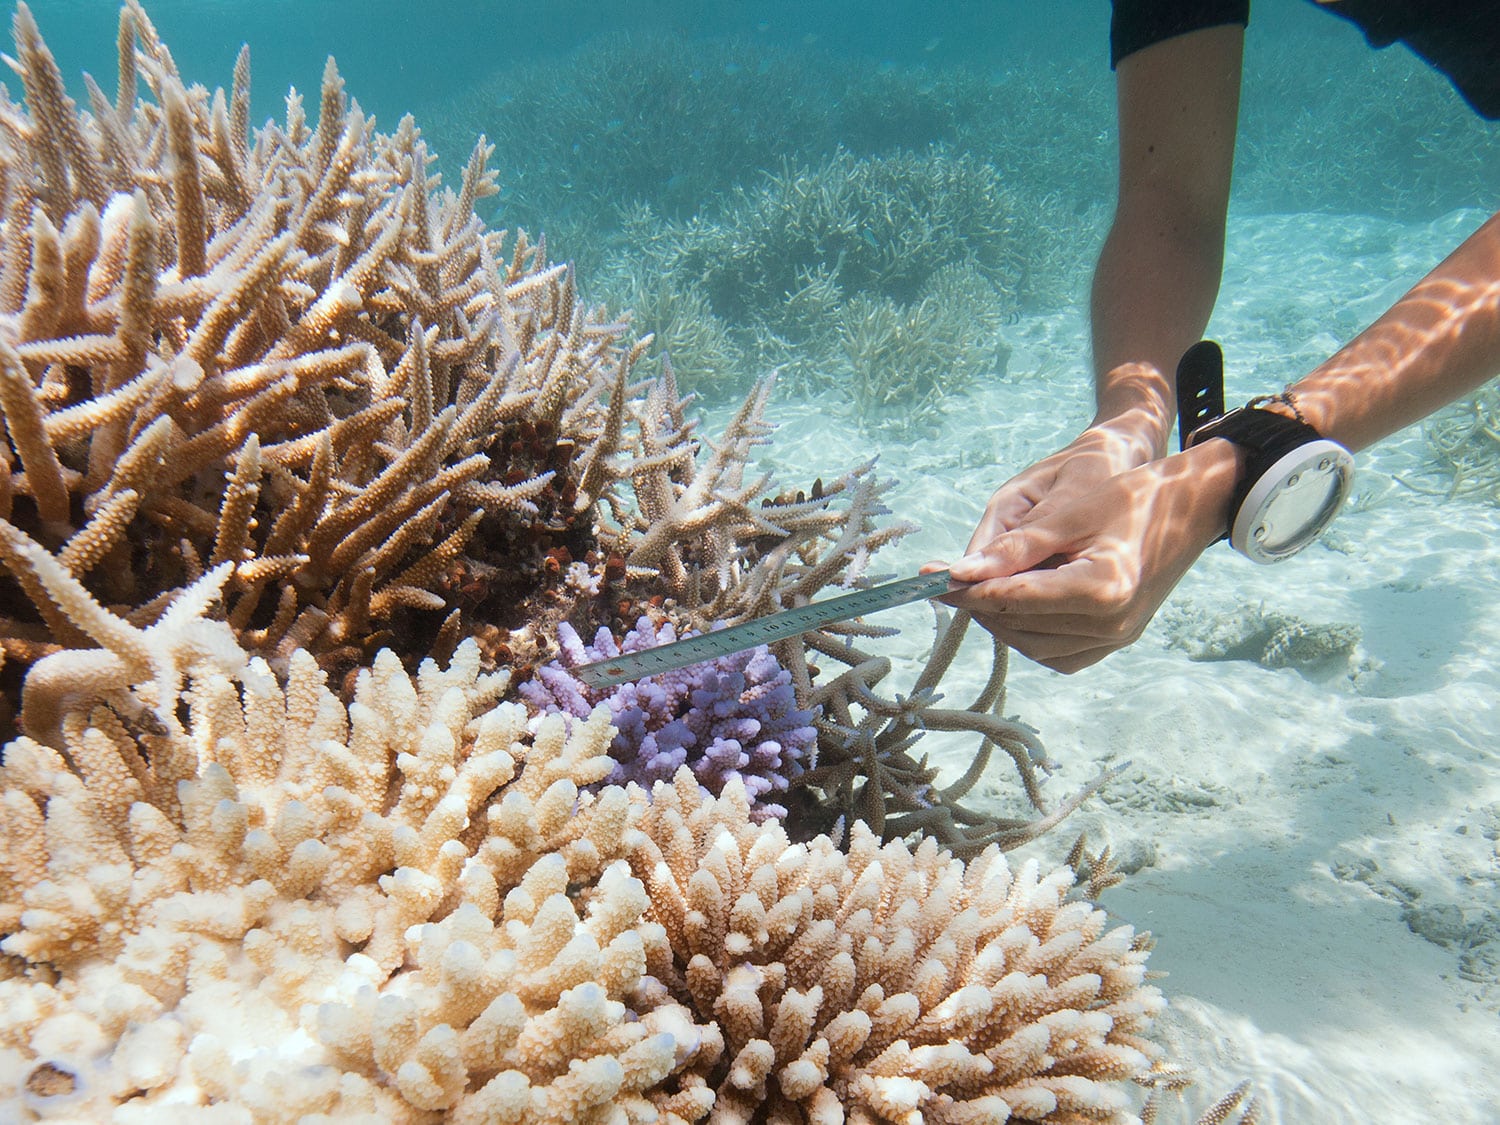 A marine biologist examines coral within the house reef at the Coco Palm Dhuni Kolhu resort in the Maldives.